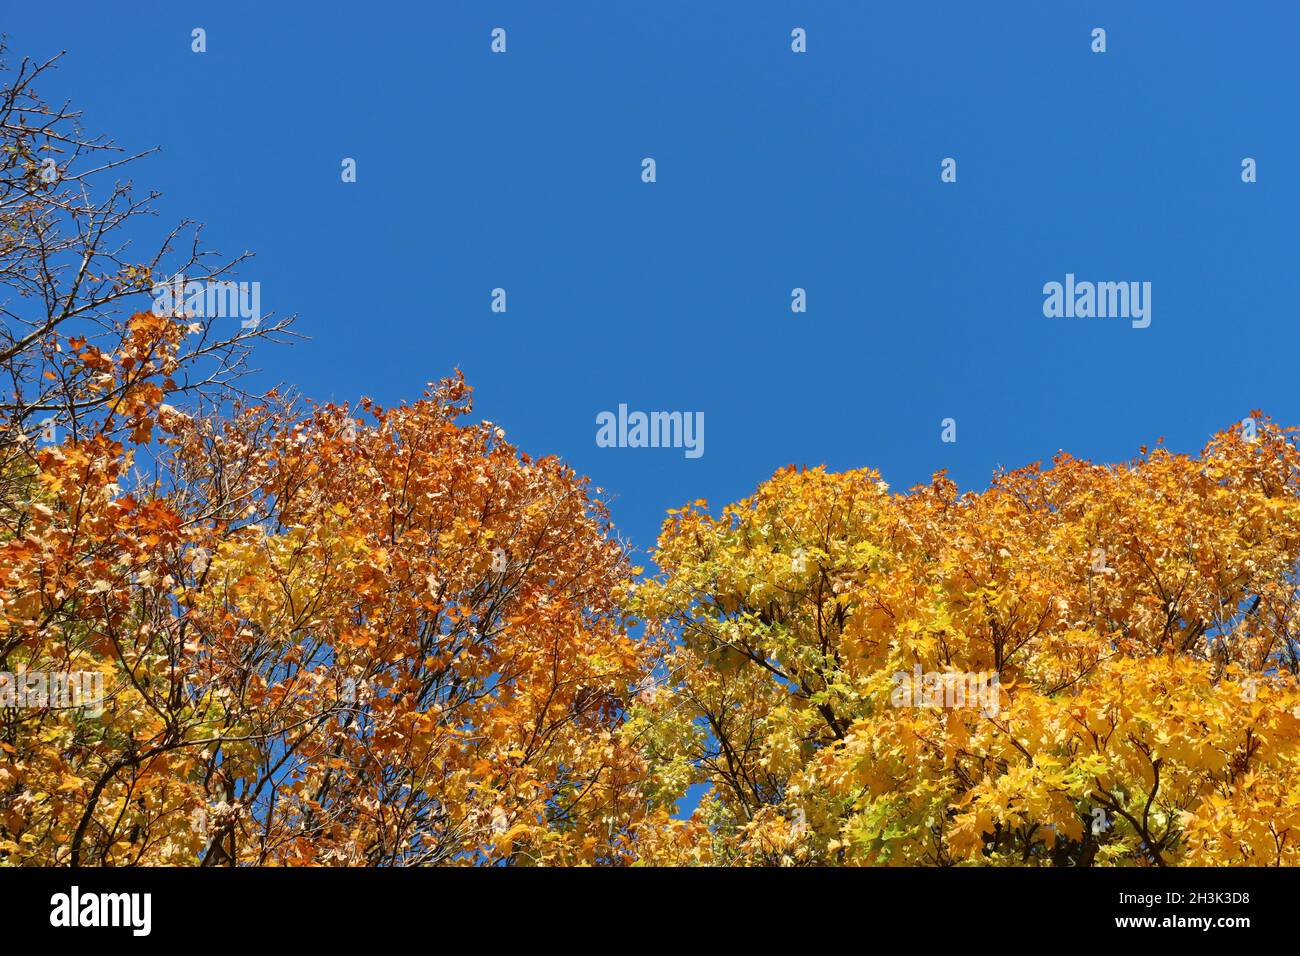 golden and yellow autumn leaves shine in the sun in front of a clear blue sky, copy space Stock Photo